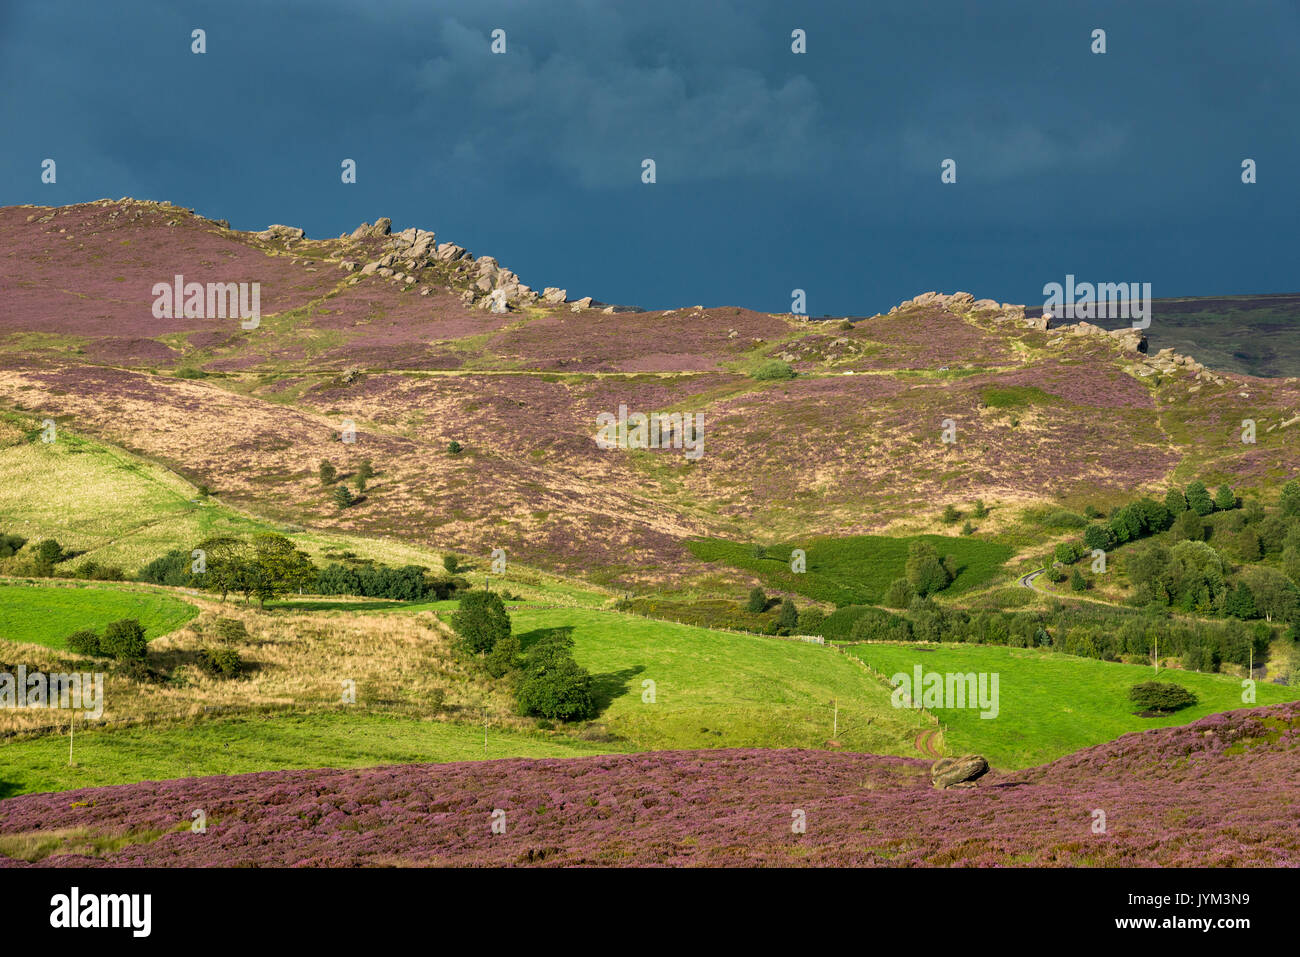 Dramatic view of Ramshaw rocks in sunlight with dark, moody sky in the background. Viewed from The Roaches, Peak District, England. Stock Photo